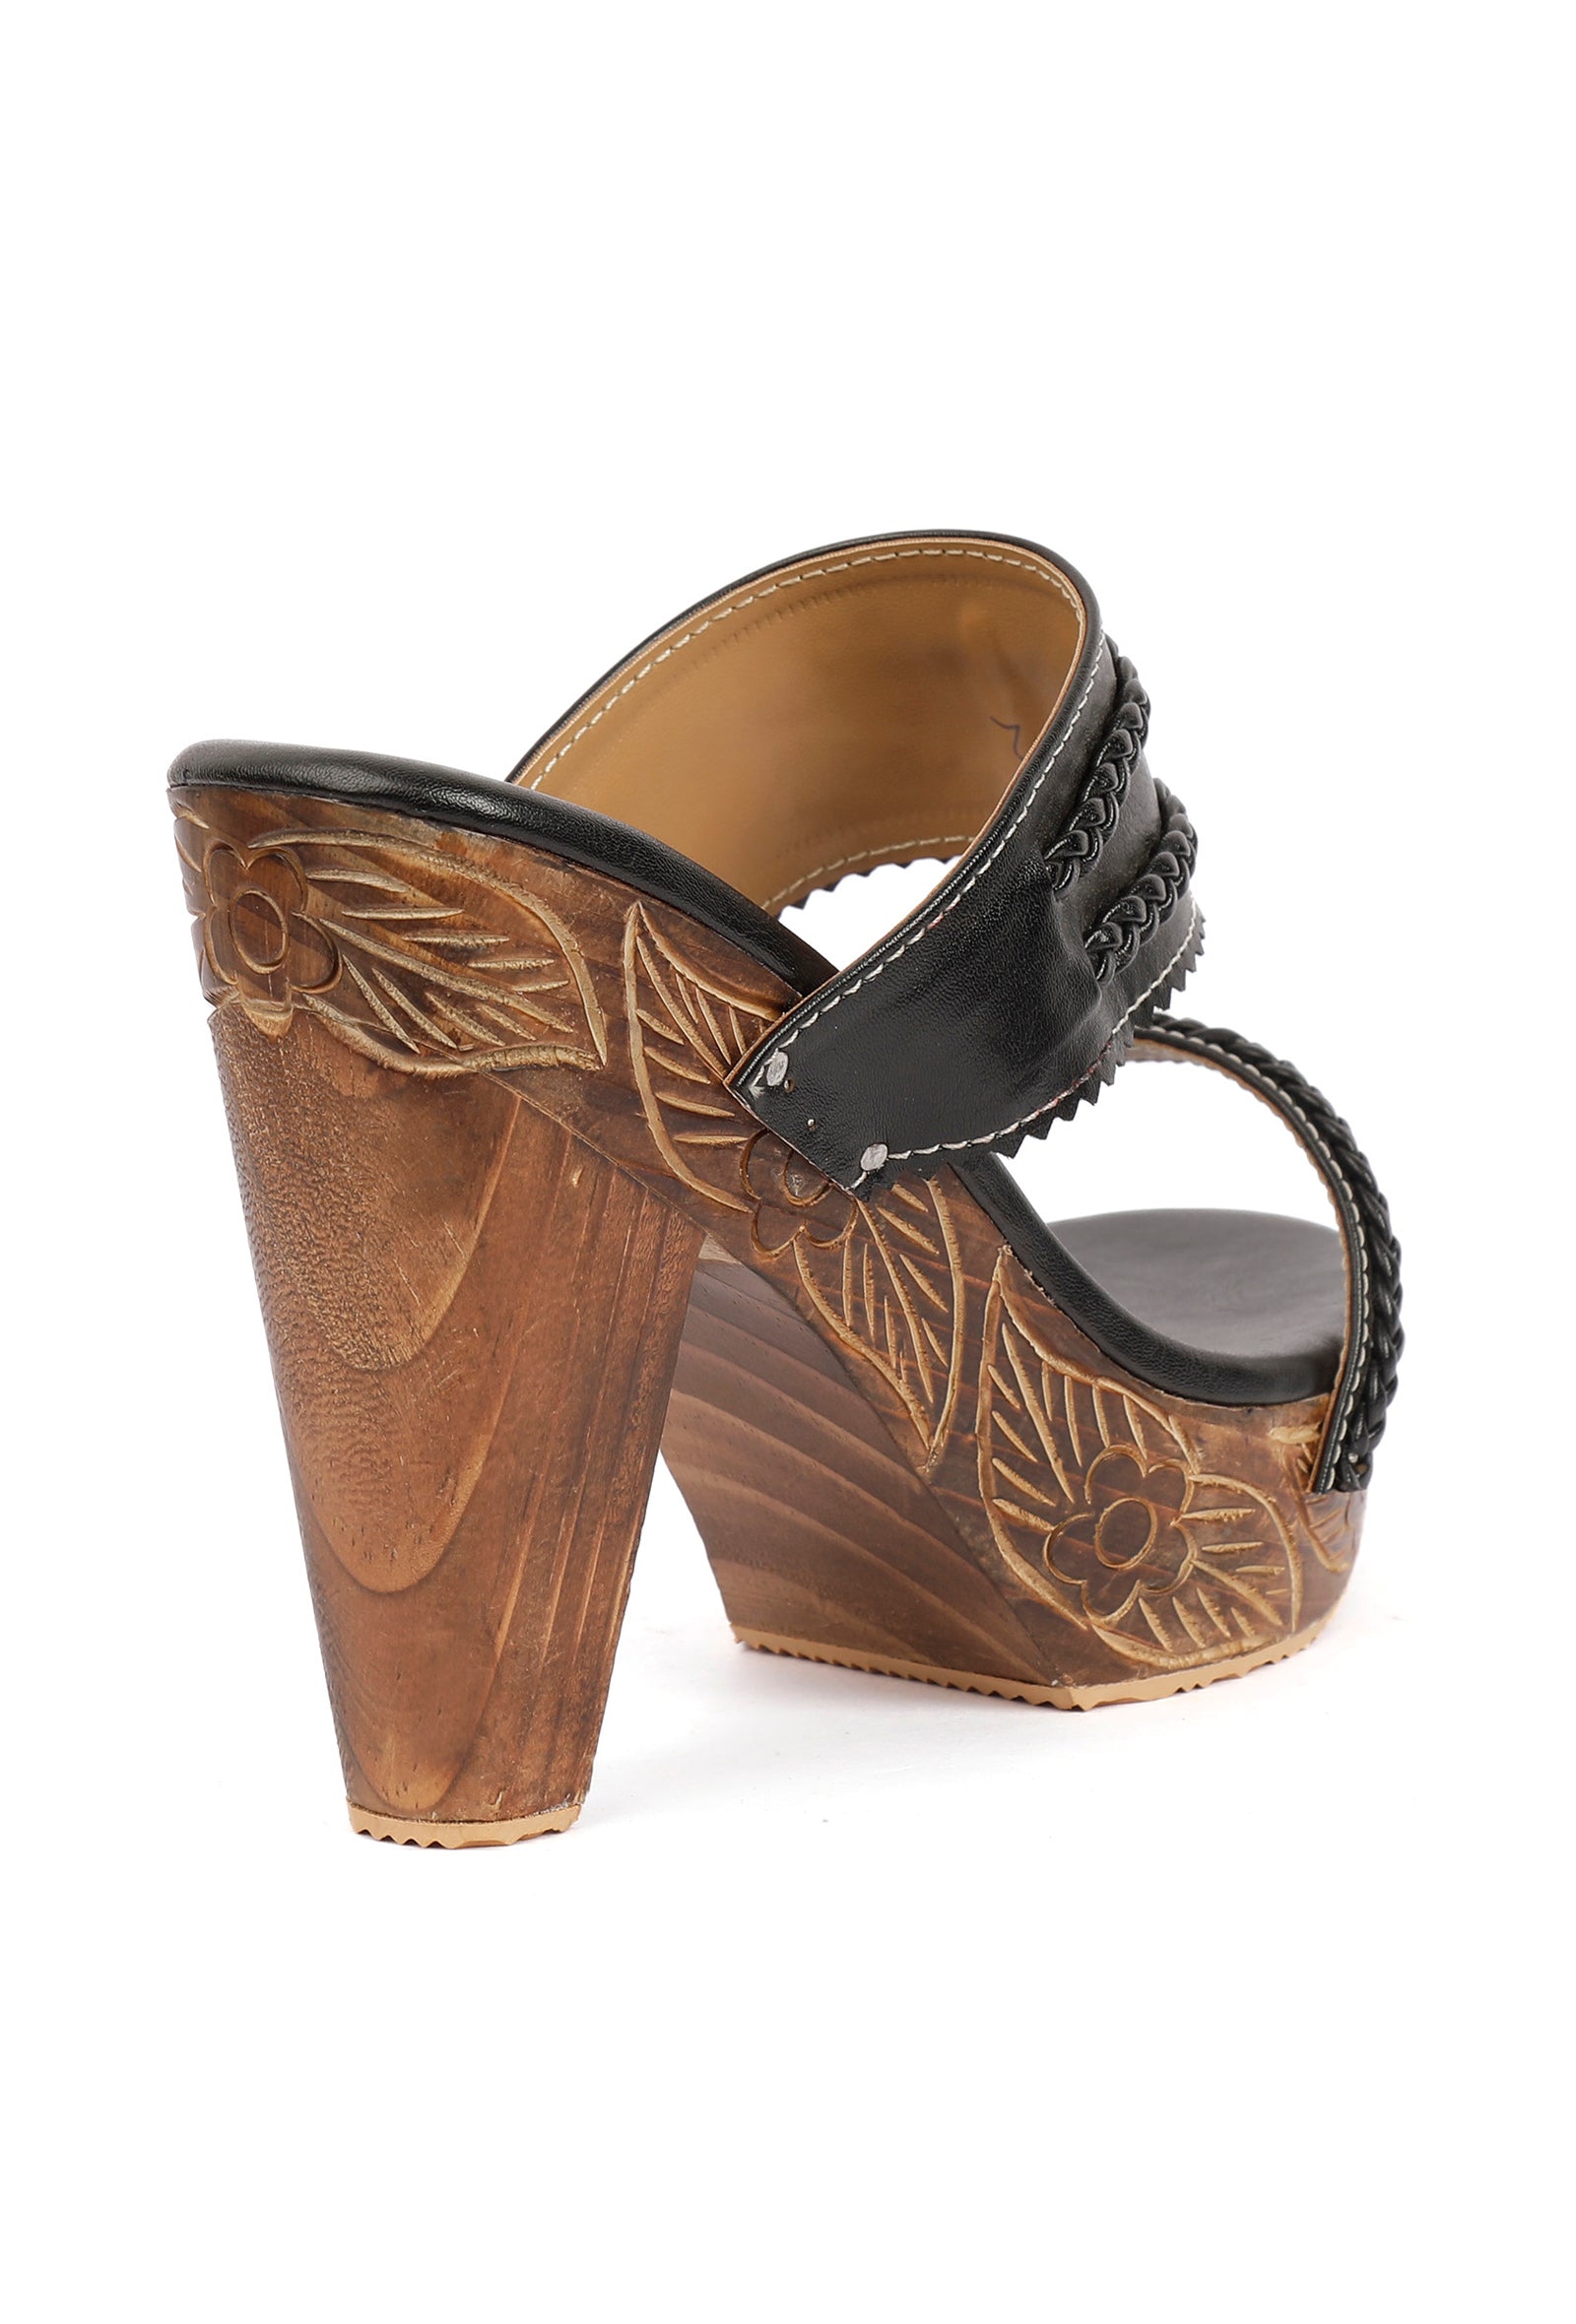 Black and Walnut Brown Wooden Carved Braided Solid Heels